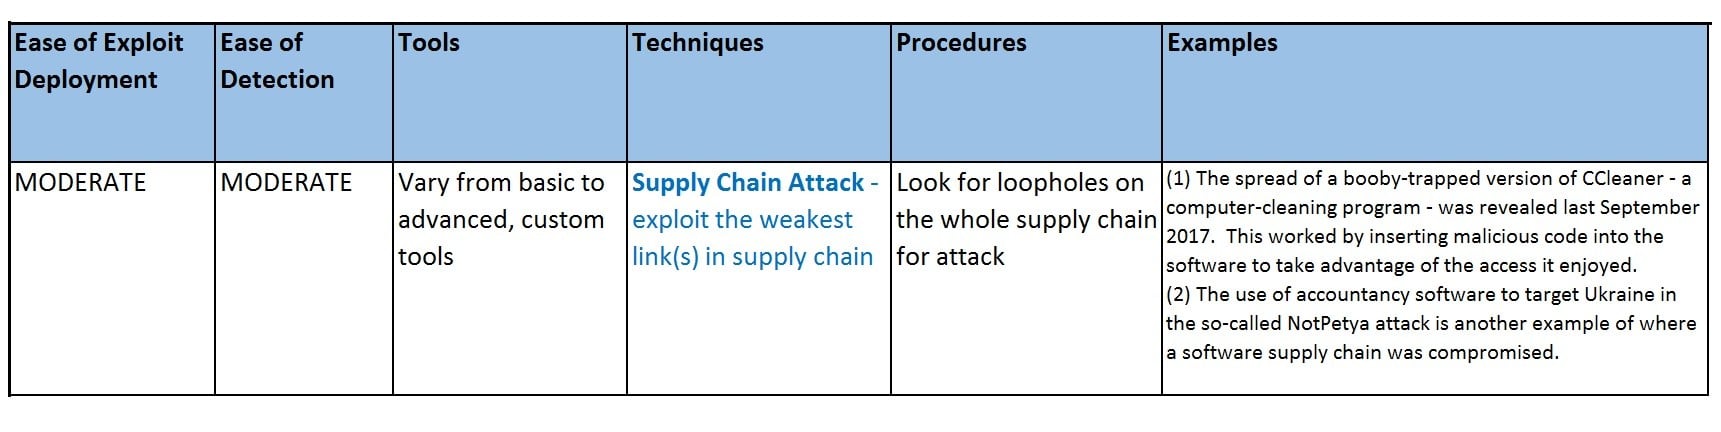 Supply Chain Attack - Exploit the weakest link in supply chain